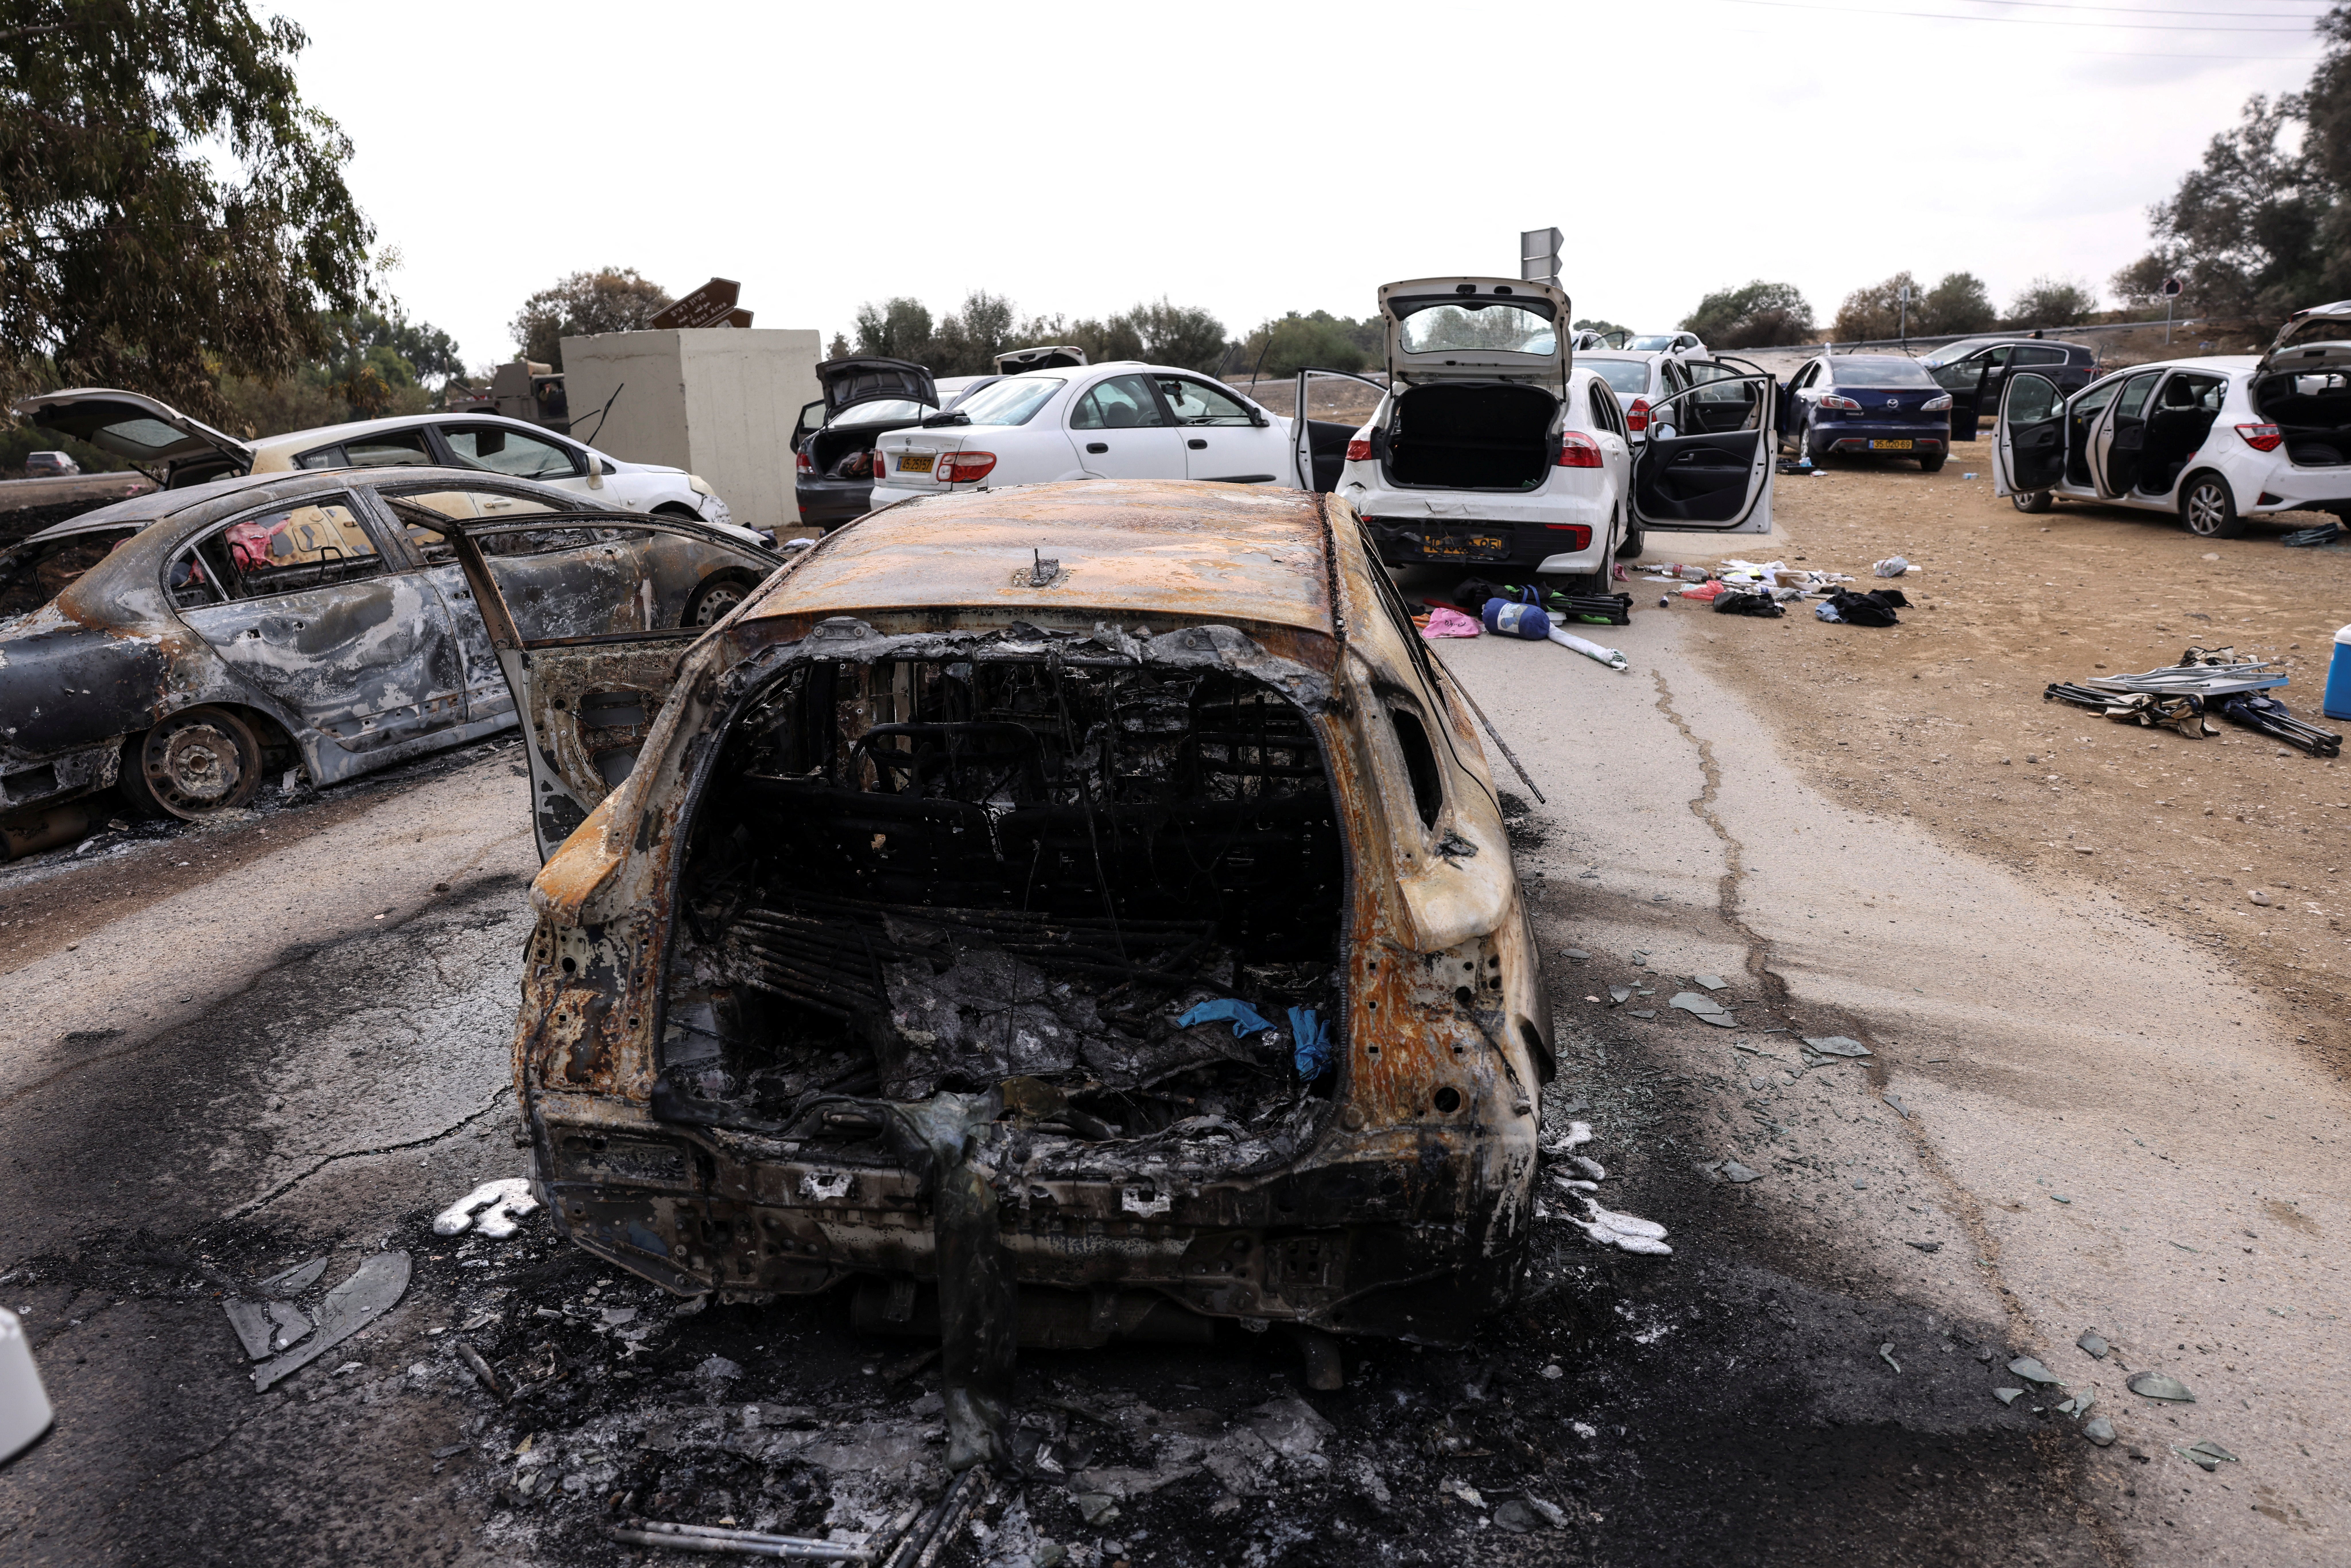 Burnt cars are abandoned in a carpark near the Hamas festival attack